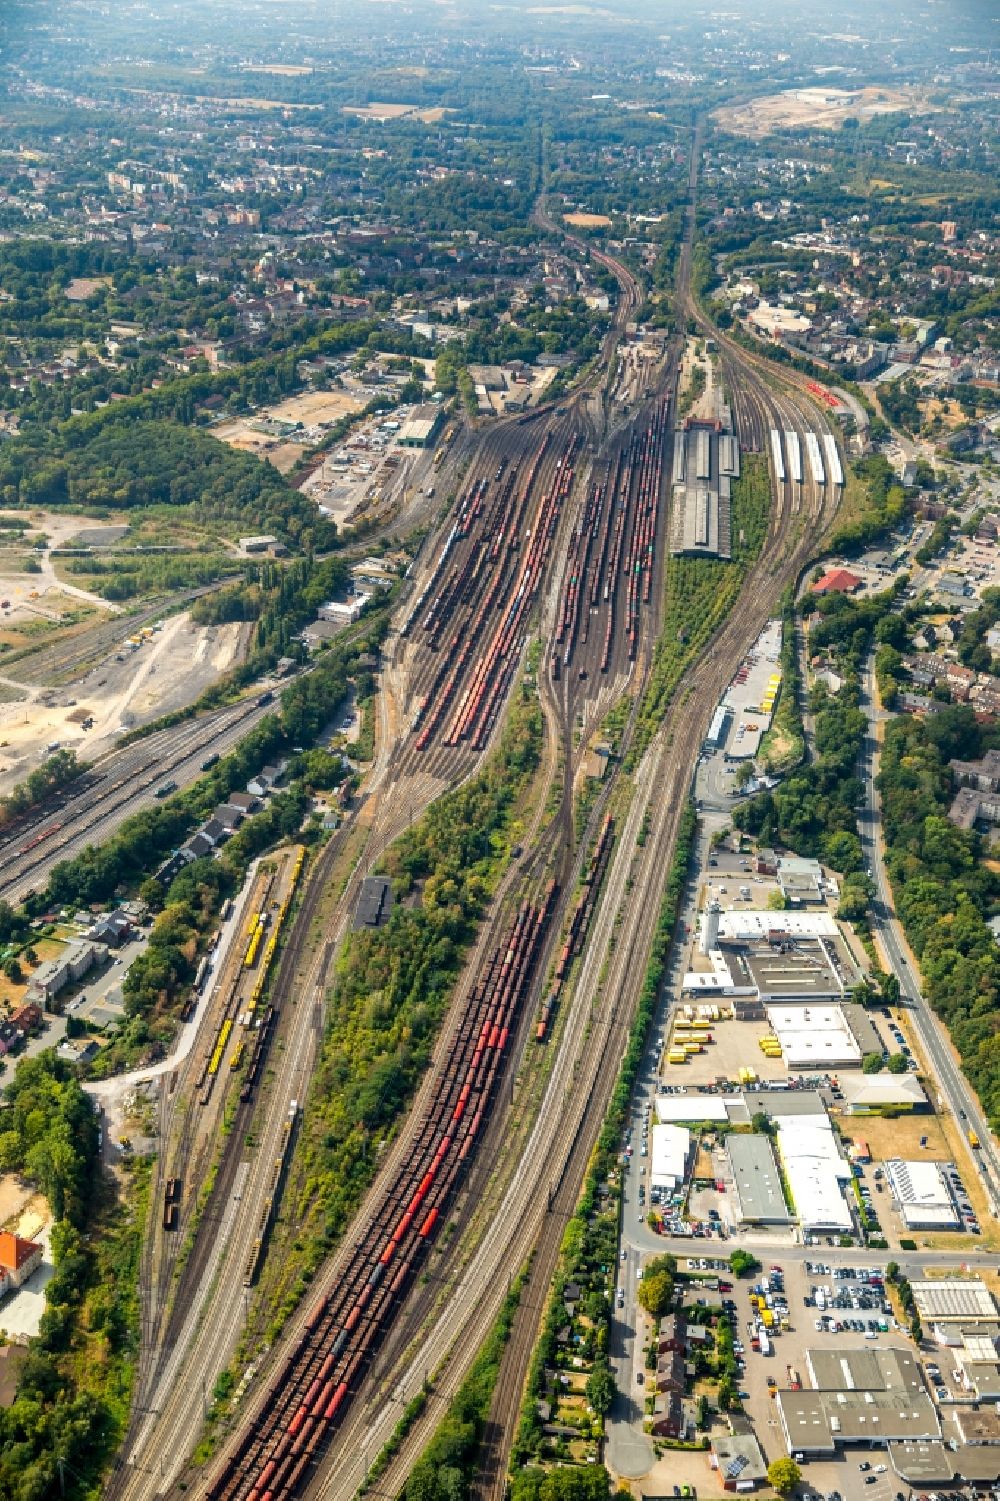 Herne from above - Railway tracks in the East of the main station of Wanne-Eickel in Herne in the state of North Rhine-Westphalia